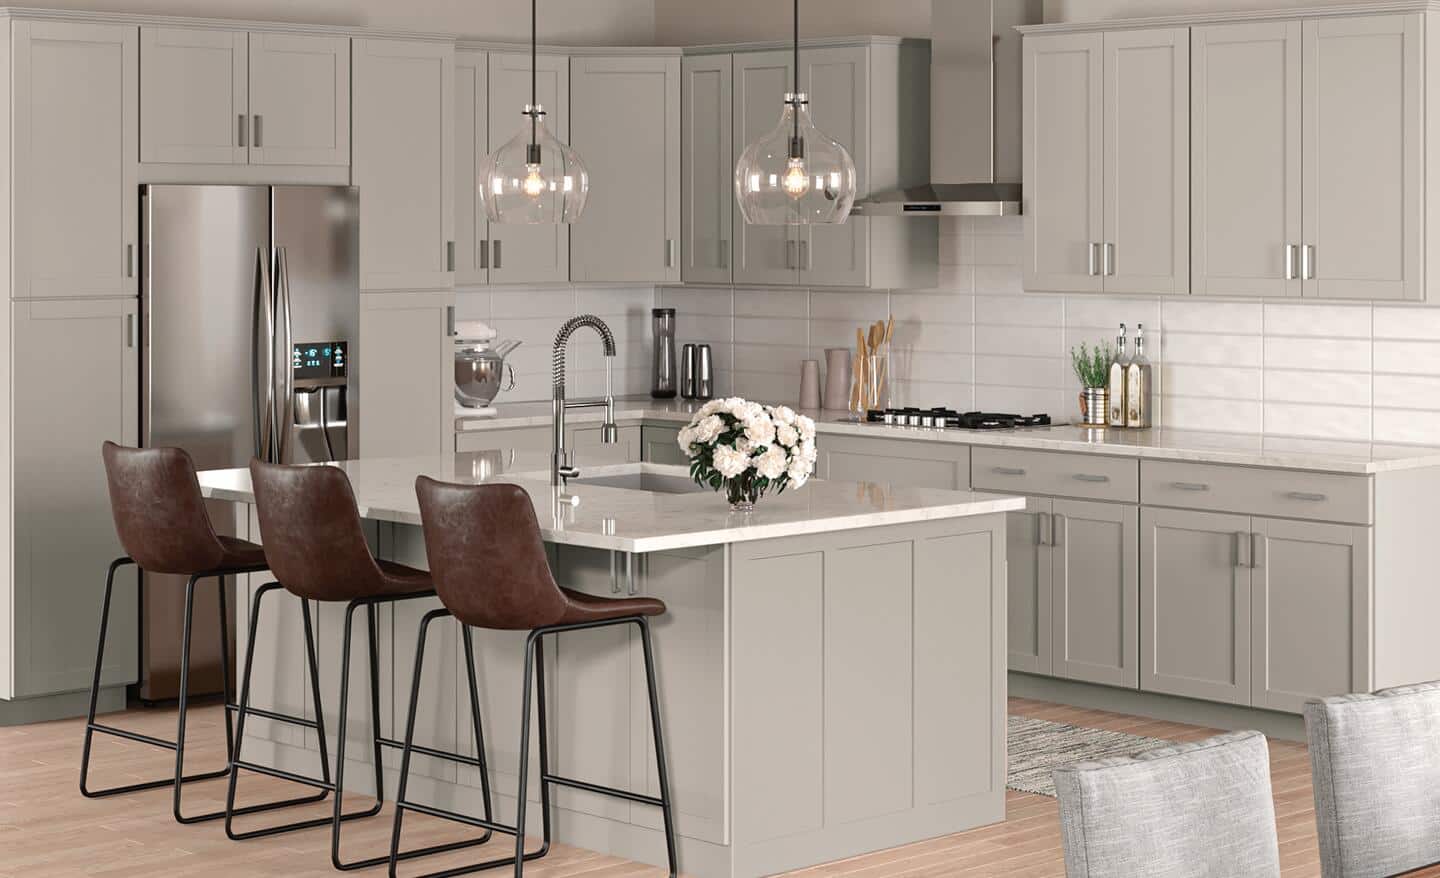 A kitchen featuring cabinets in a shaker gray finish.